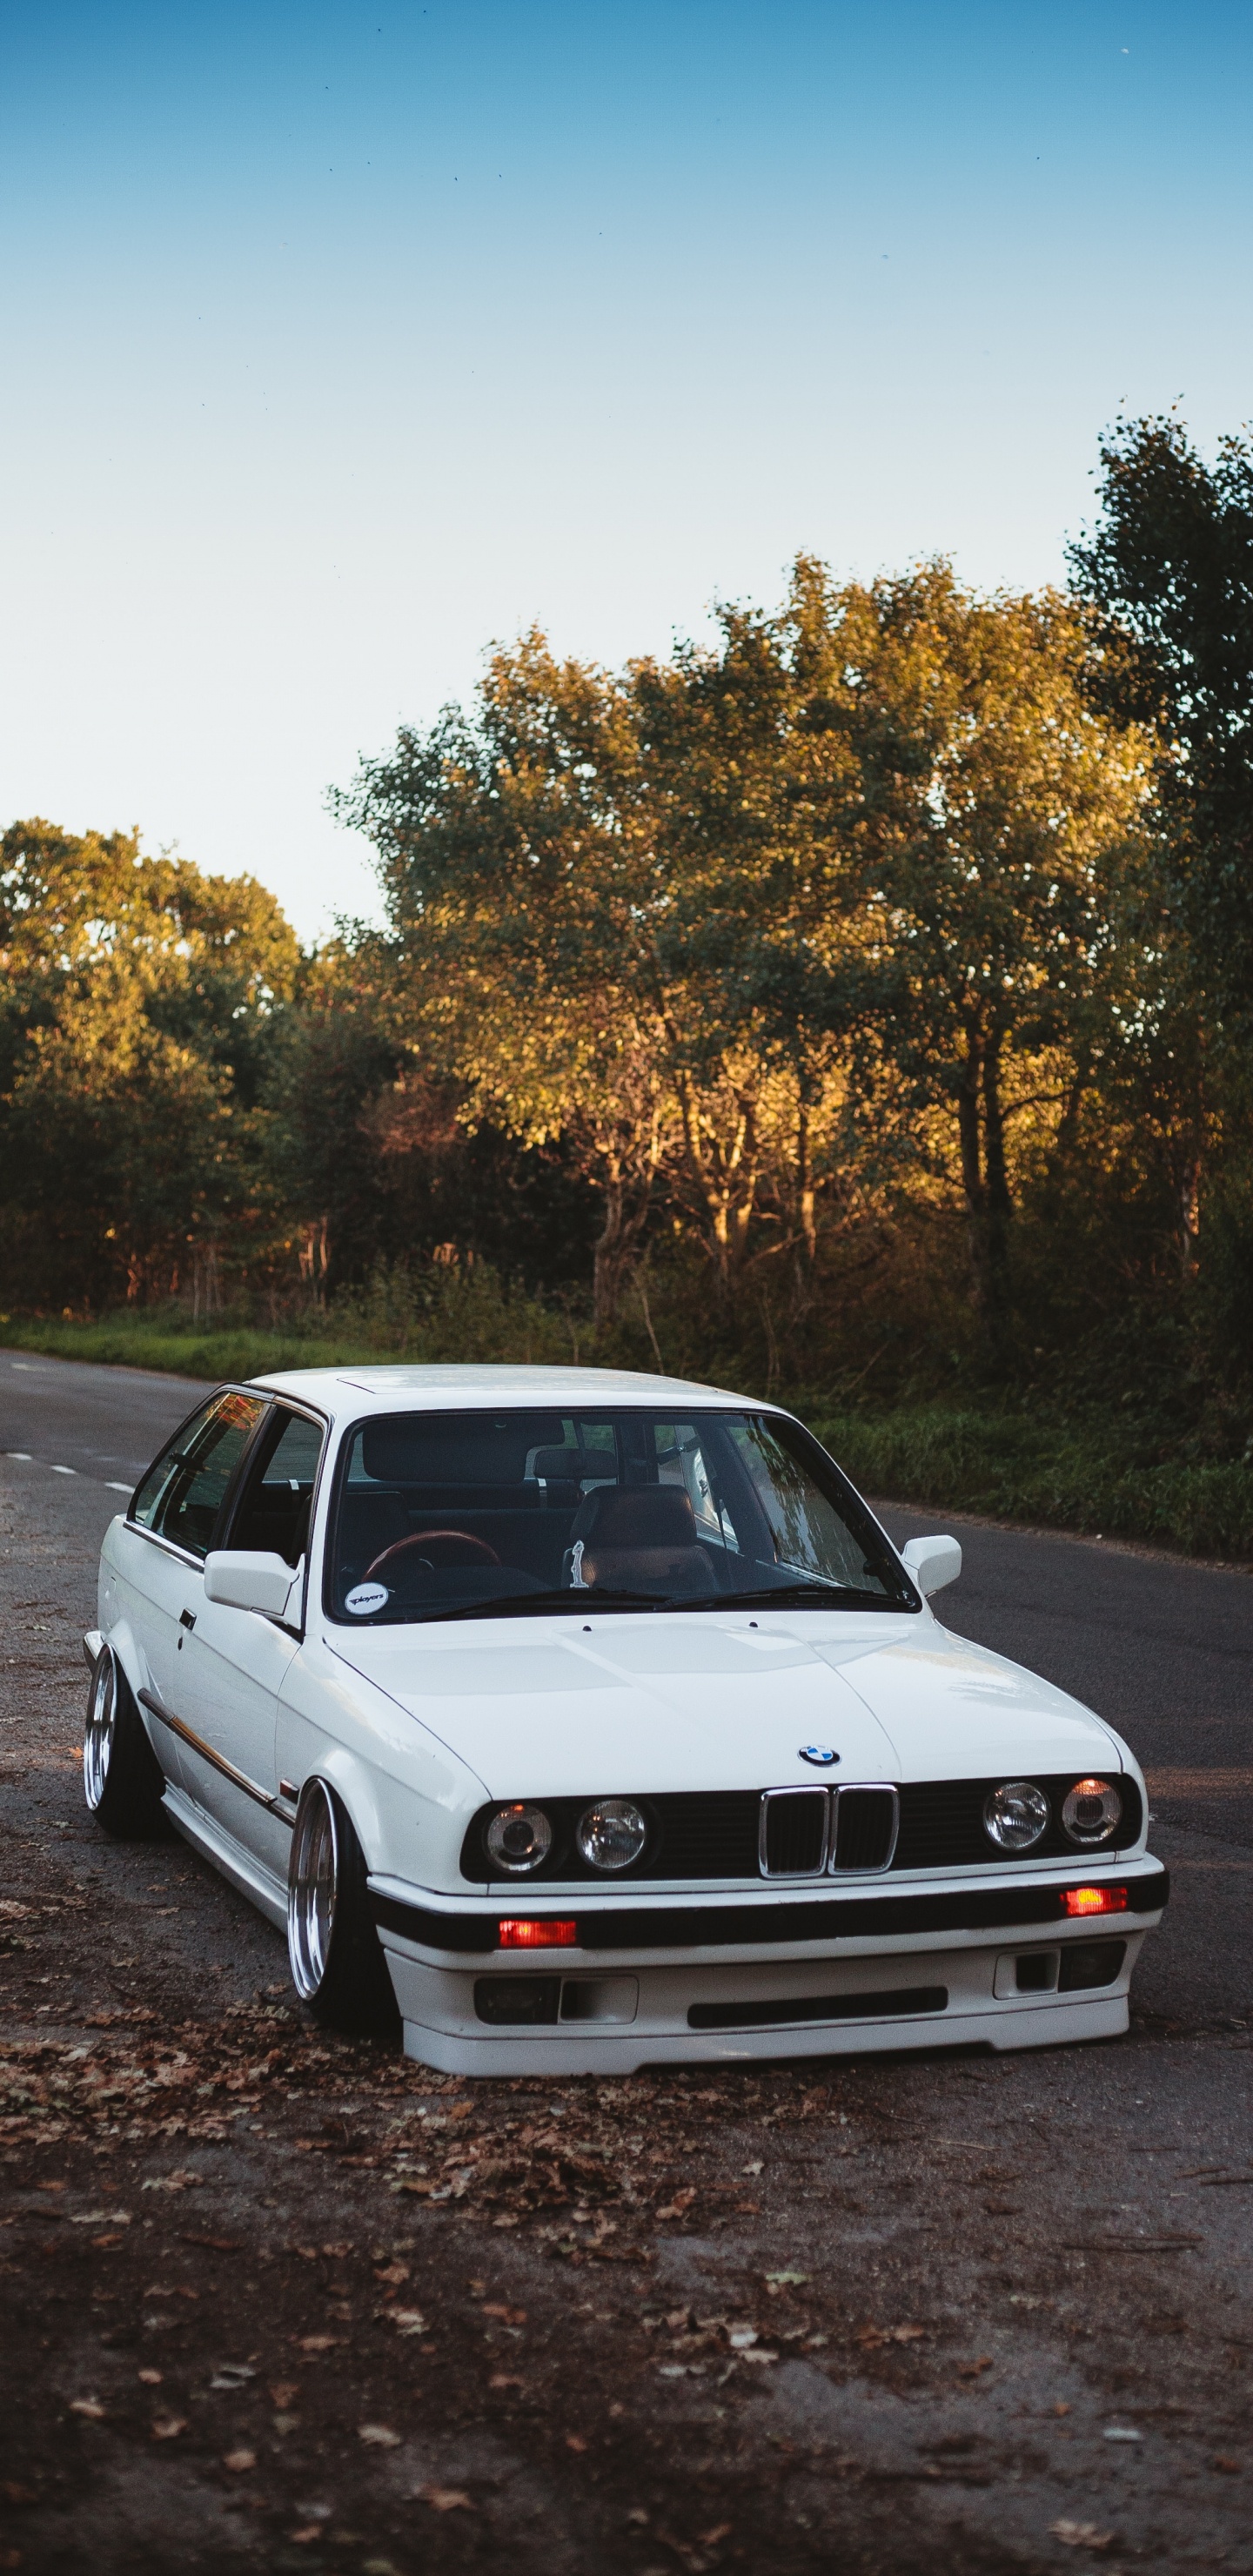 White Bmw m 3 on Road During Daytime. Wallpaper in 1440x2960 Resolution